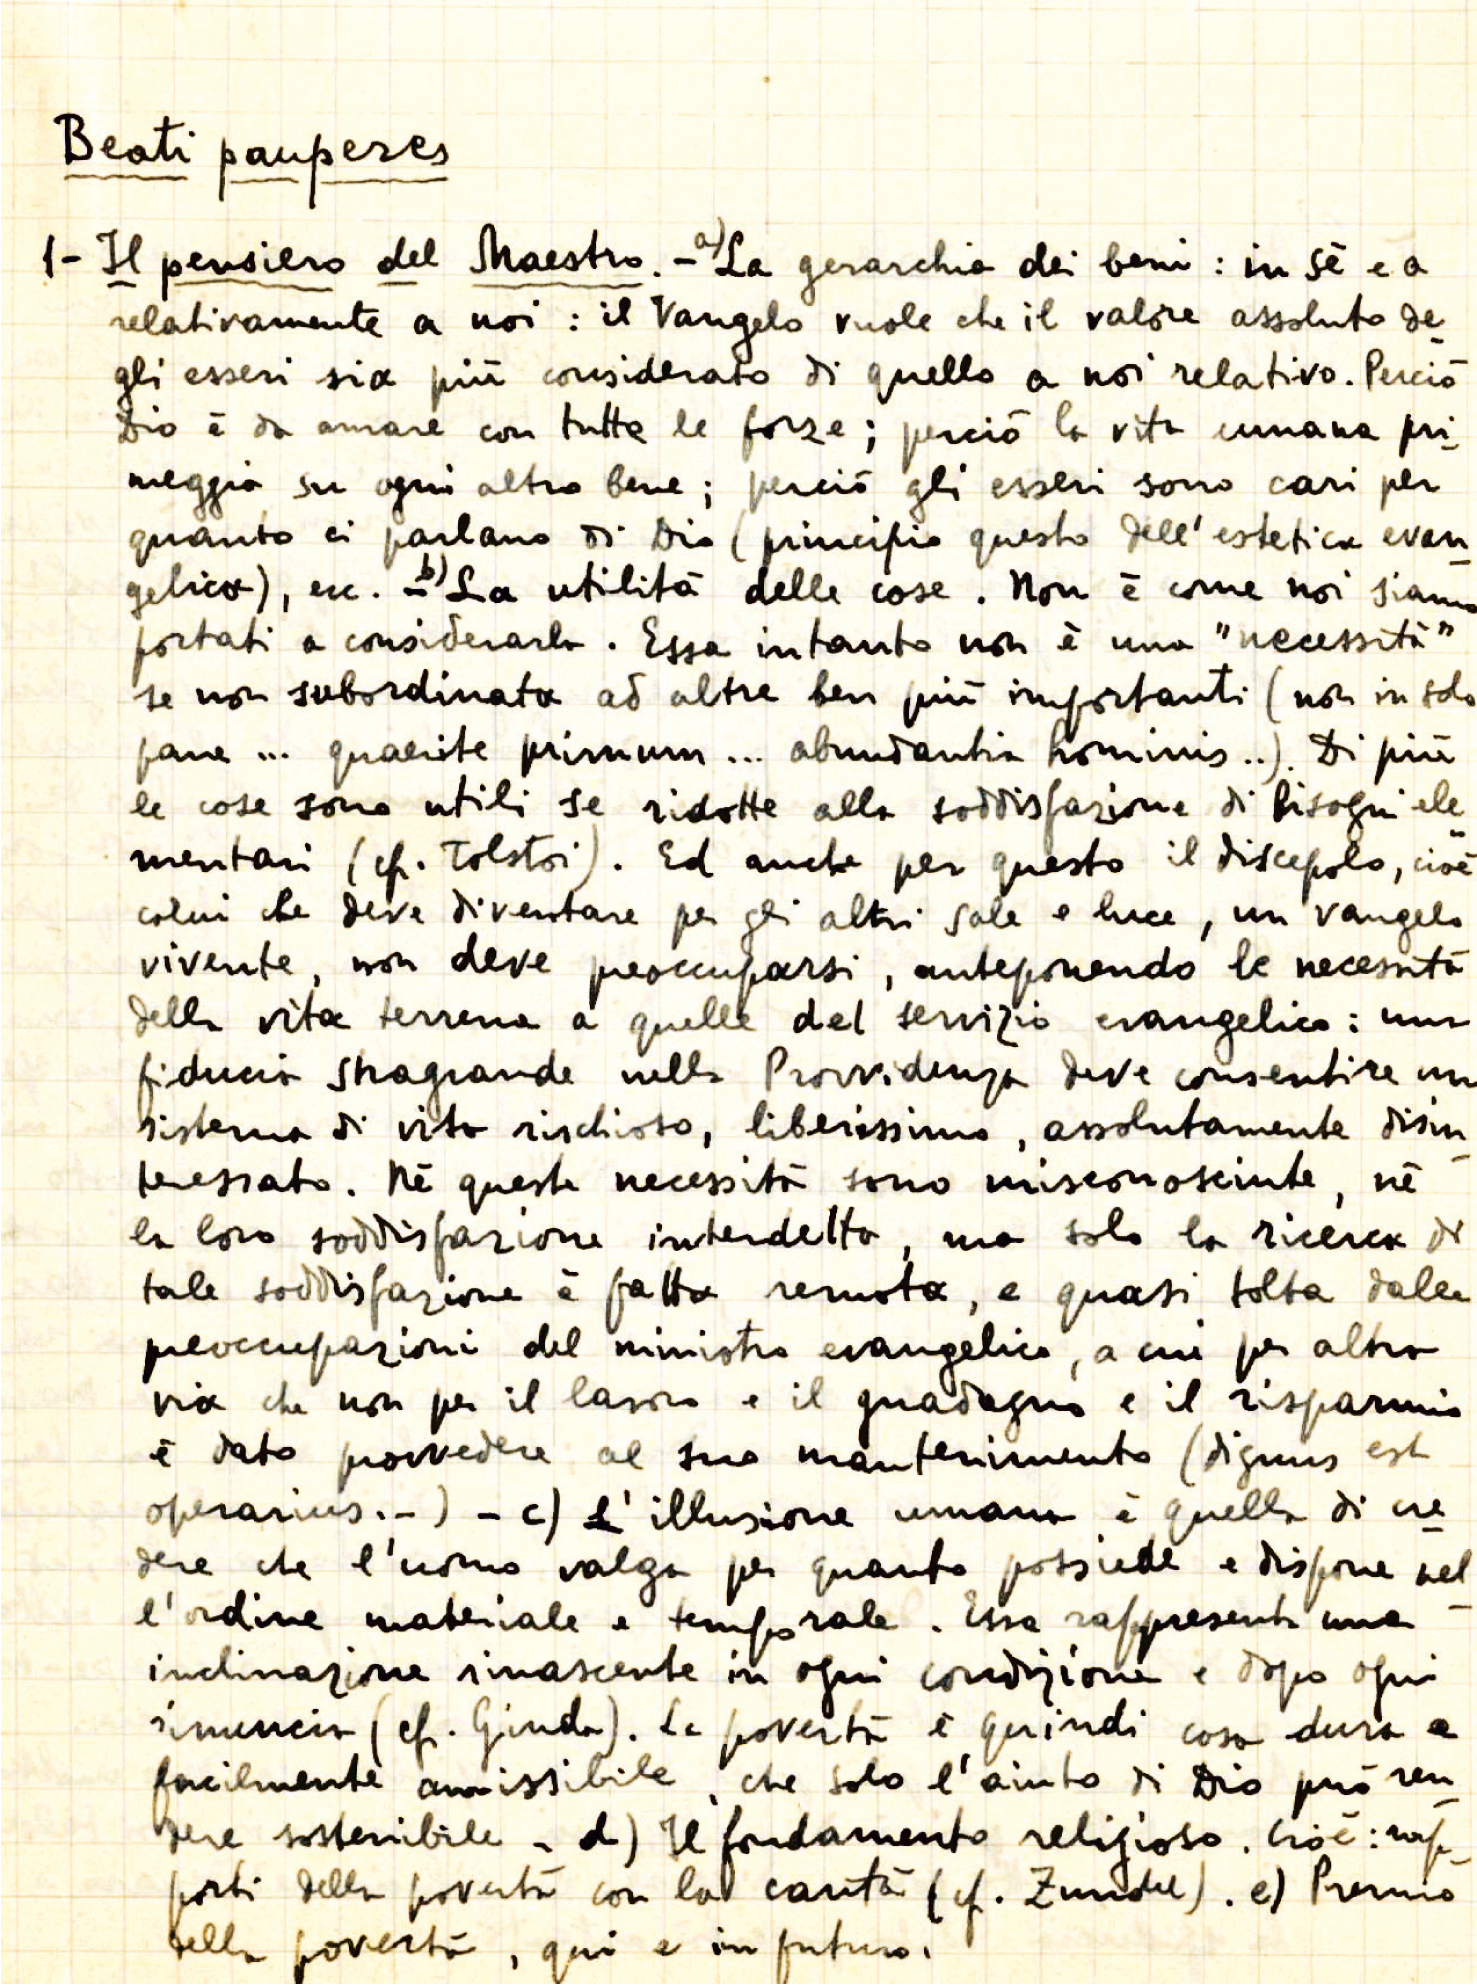 The autograph page written by Montini in view of the San Vincenzo Conferences